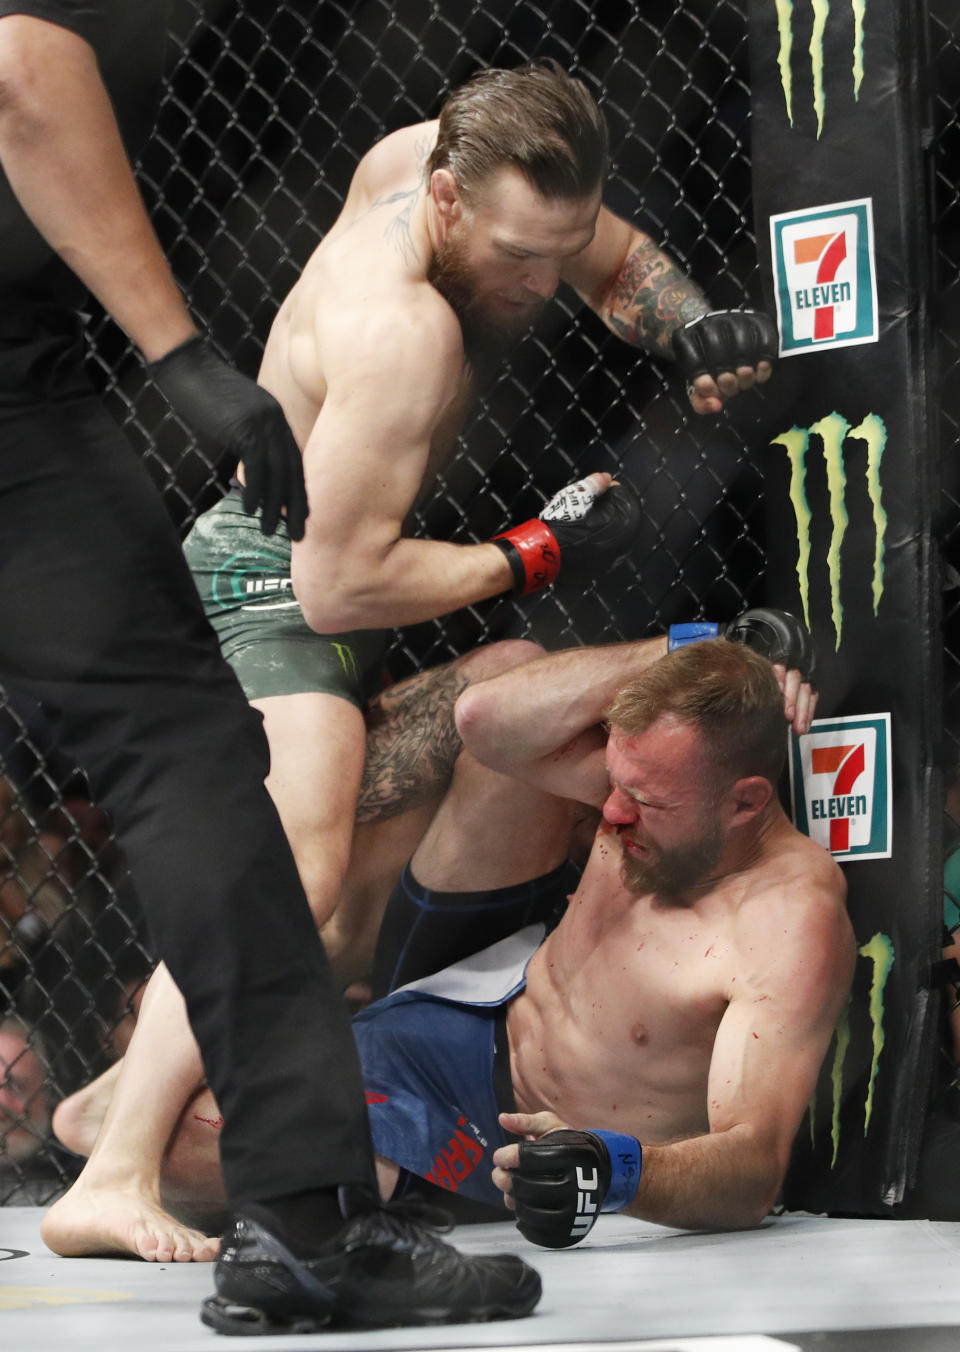 Conor McGregor, top, fights Donald "Cowboy" Cerrone during a UFC 246 welterweight mixed martial arts bout Saturday, Jan. 18, 2020, in Las Vegas. (AP Photo/John Locher)